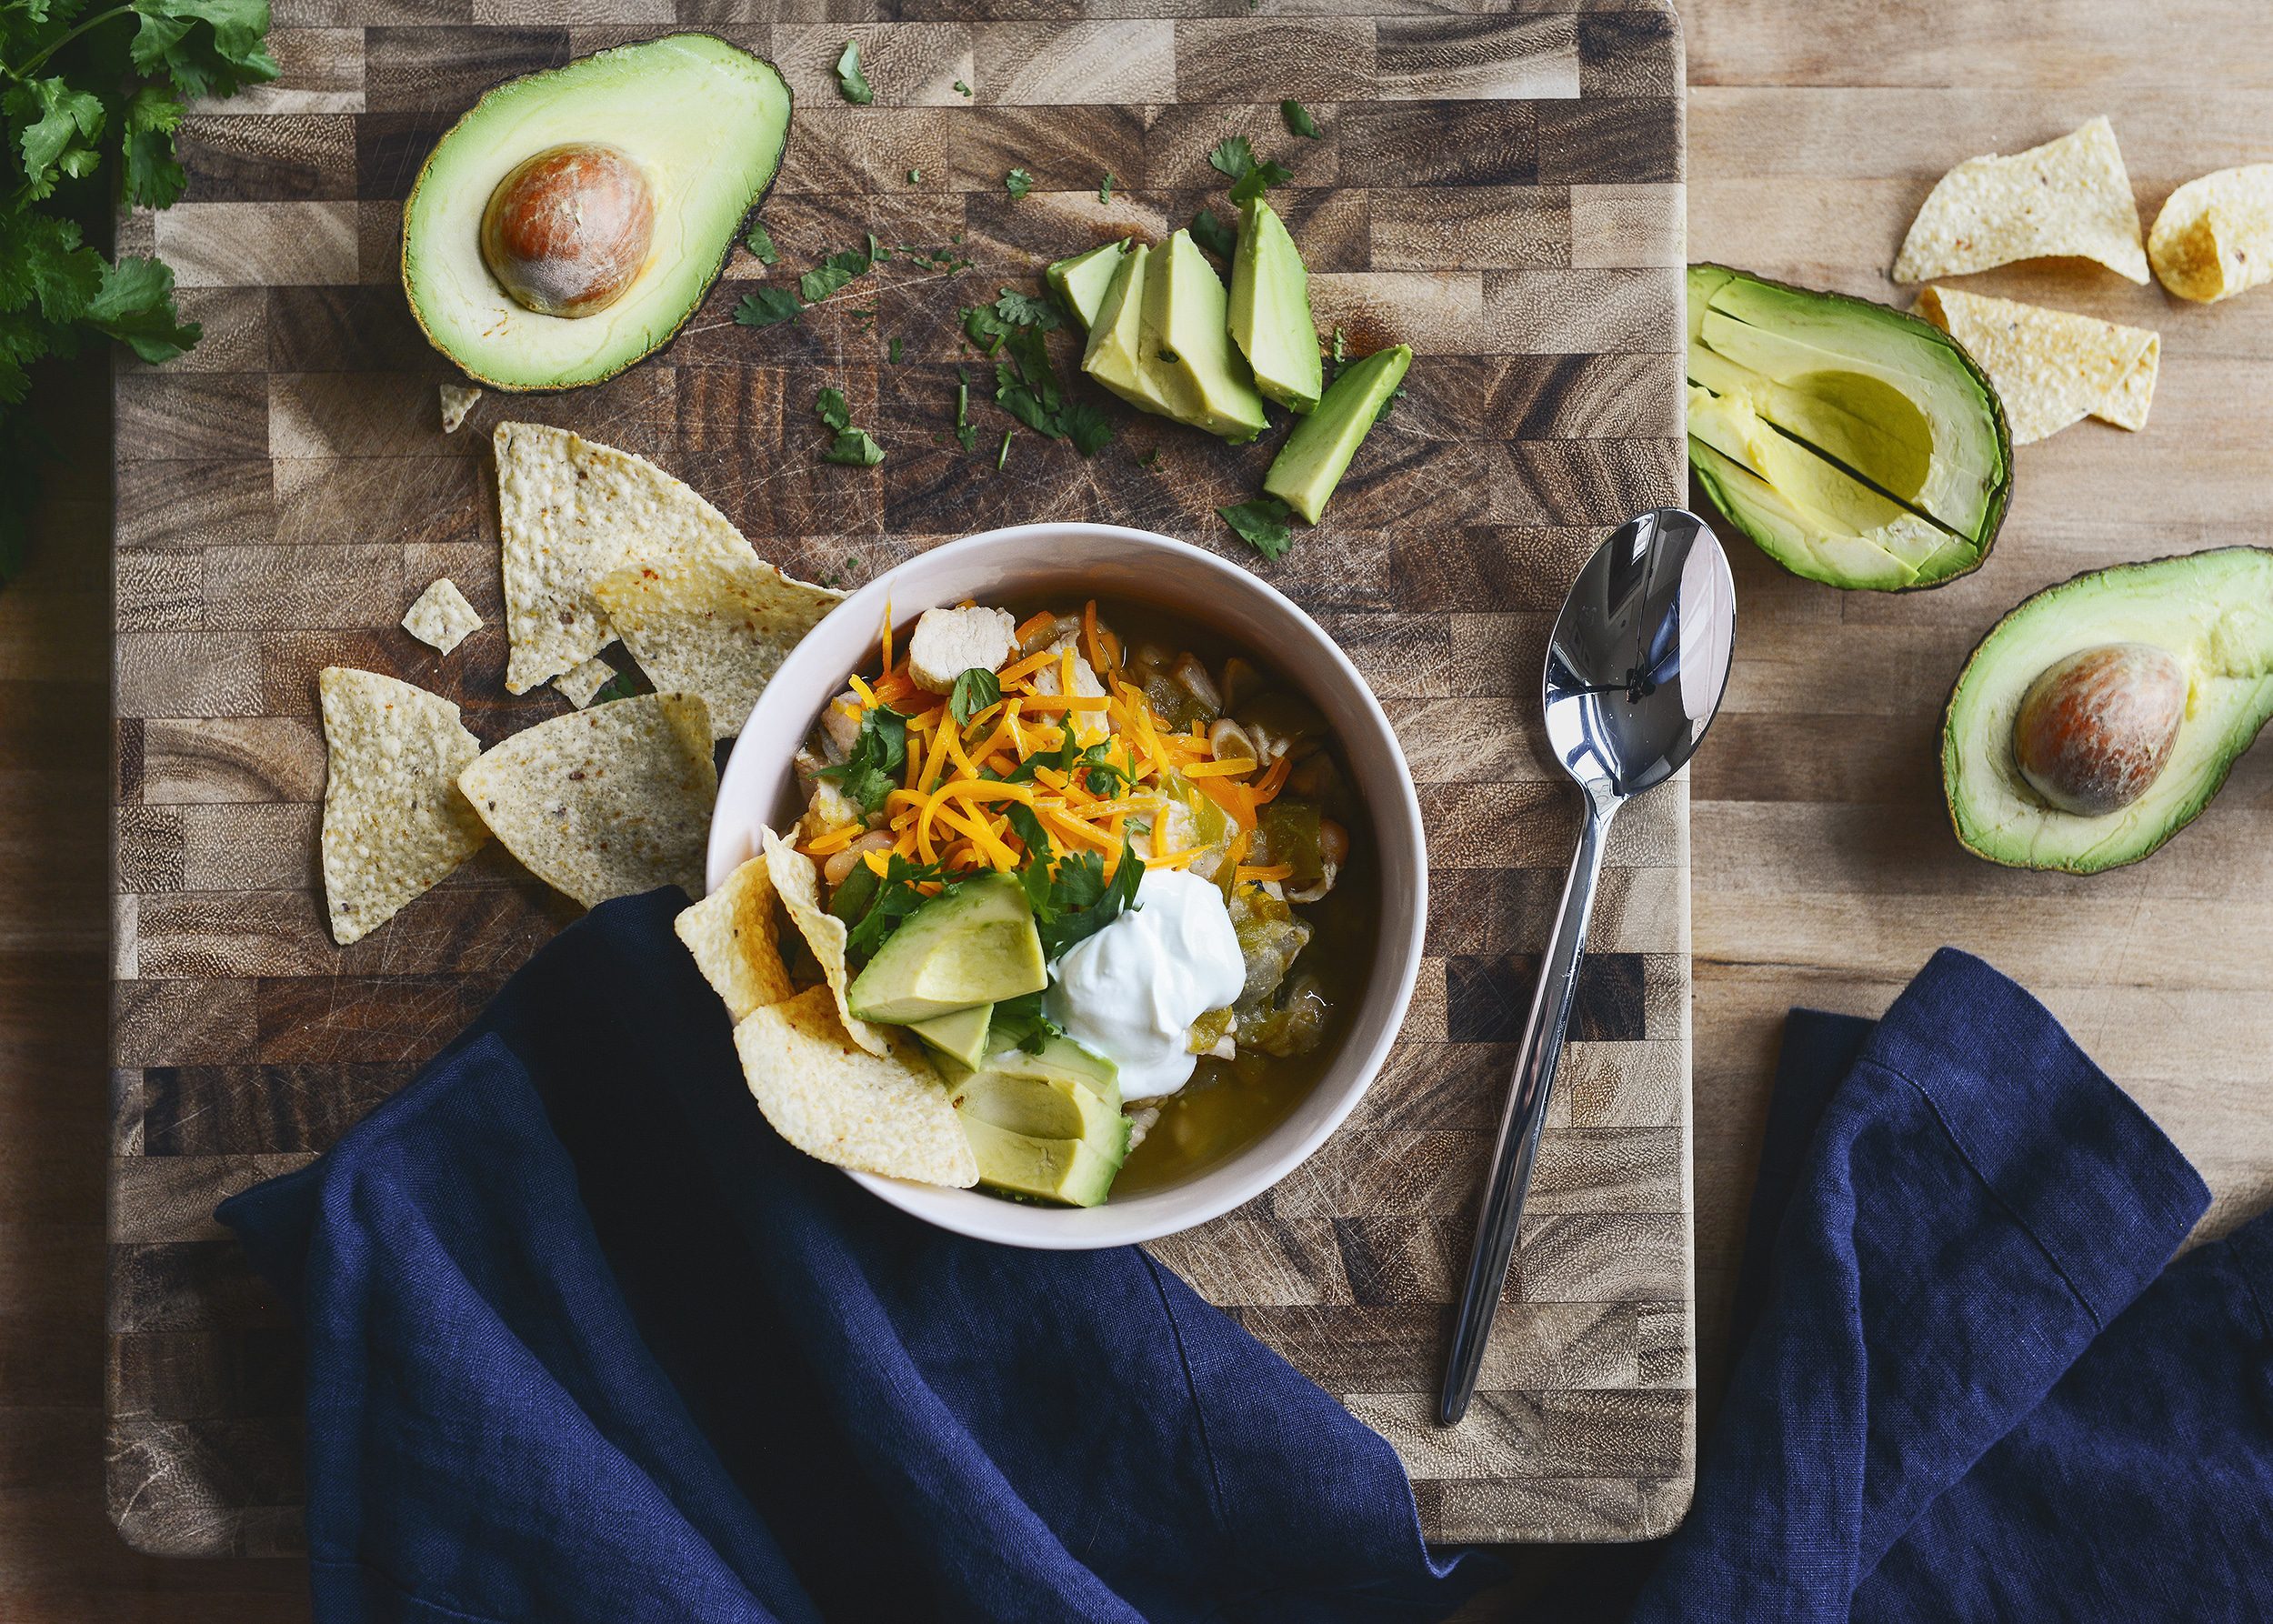 A bowl of warm chili with avocado and navy linen napkins | Our White Chicken Chili! Full of tomatillos and chunky chicken, we top it with sliced avocado and heaps of cilantro. via Yellow Brick Home